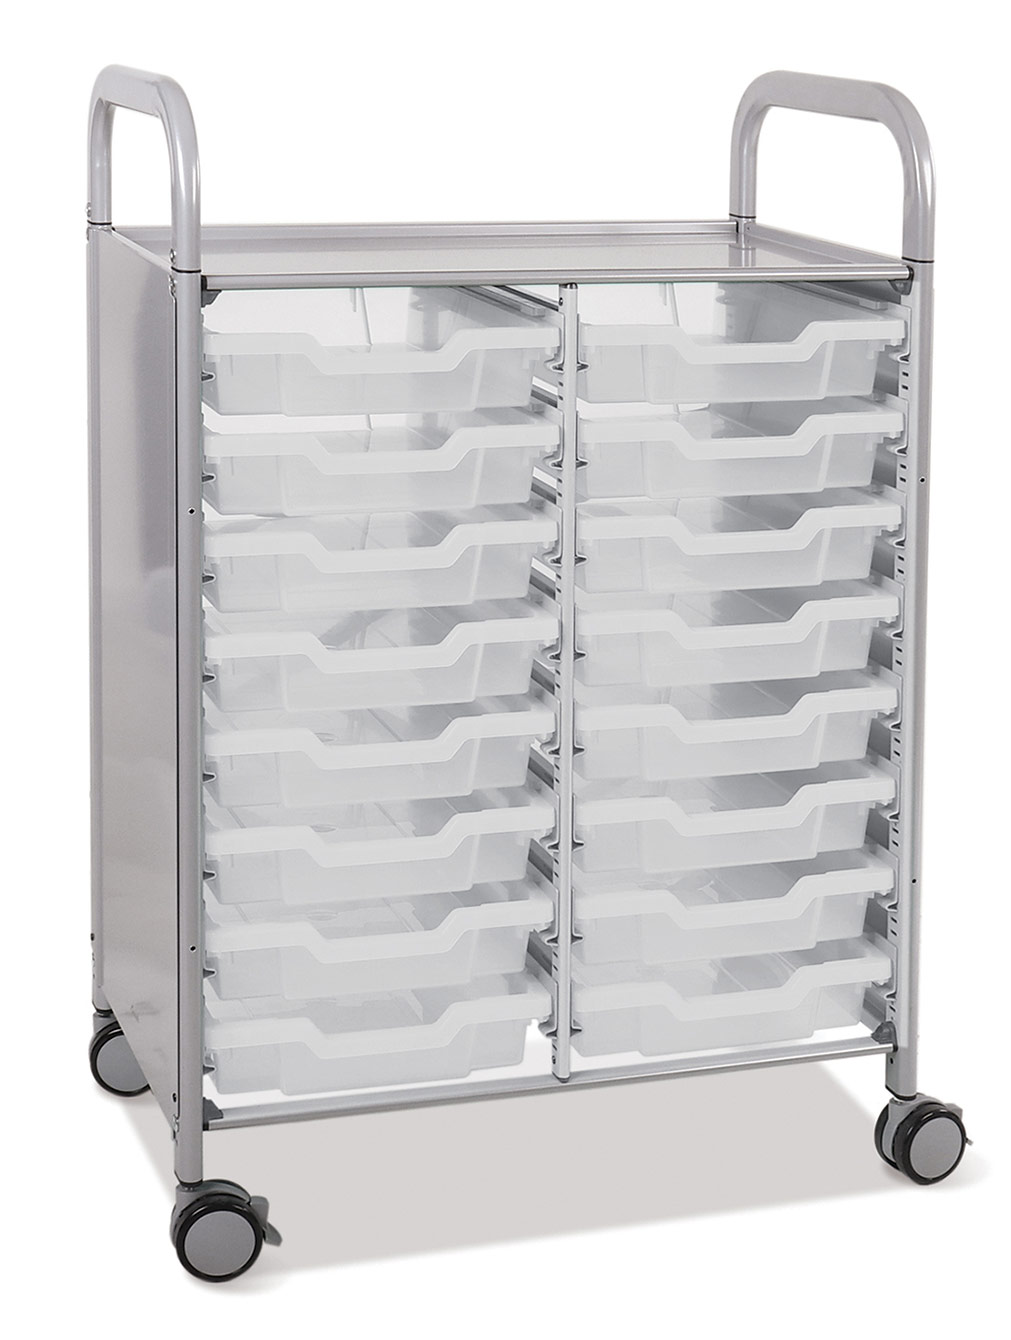 Trays Plus Callero Double Trolley Gratnells - Shallow 16 Shield